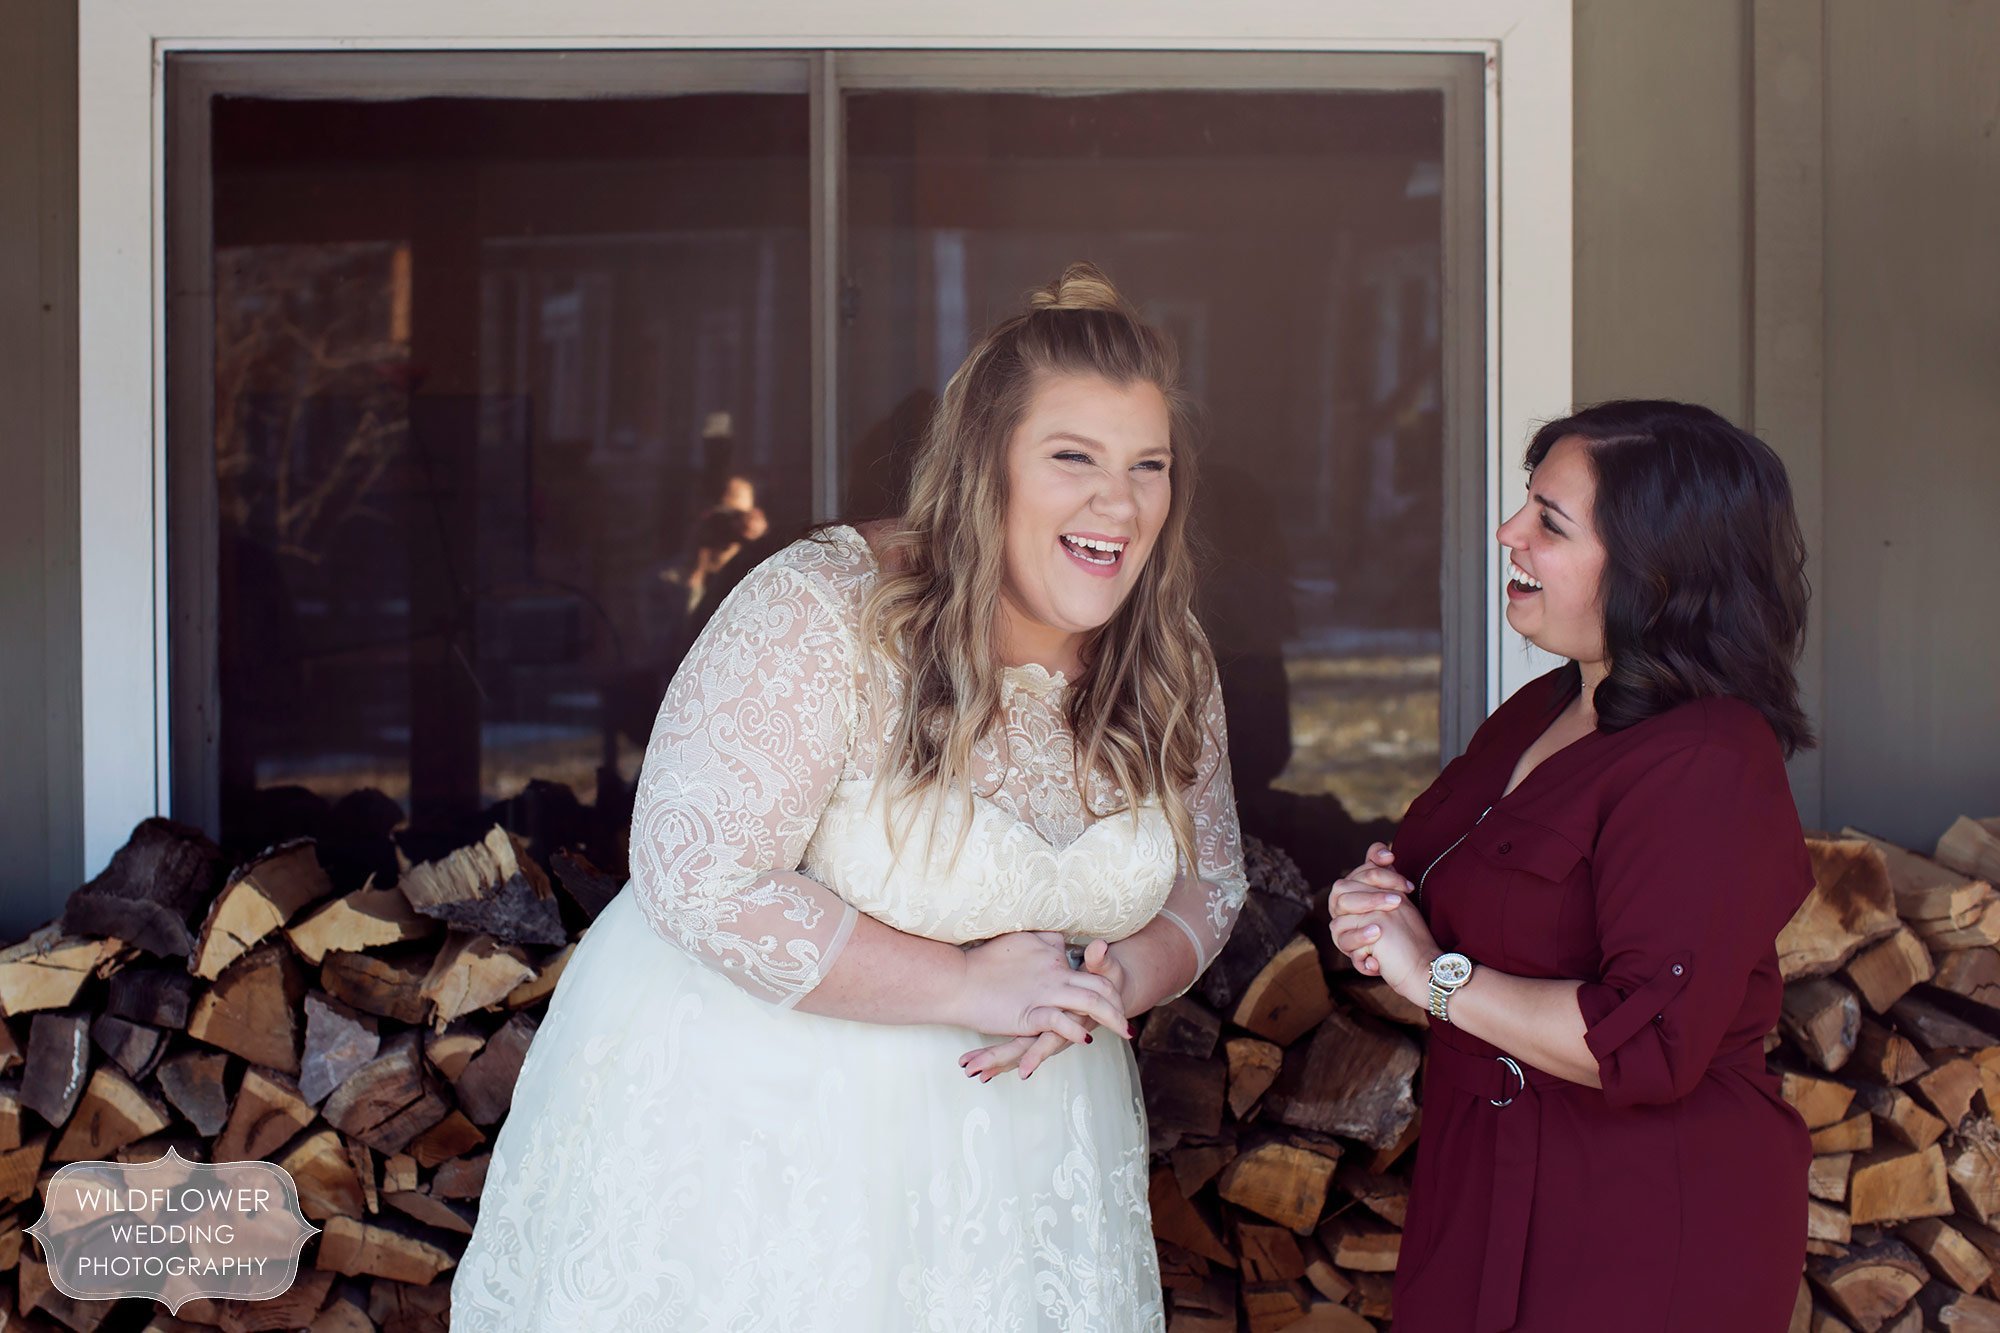 Great documentary photo of the bride laughing with her best friend after her same sex ceremony in the winter.